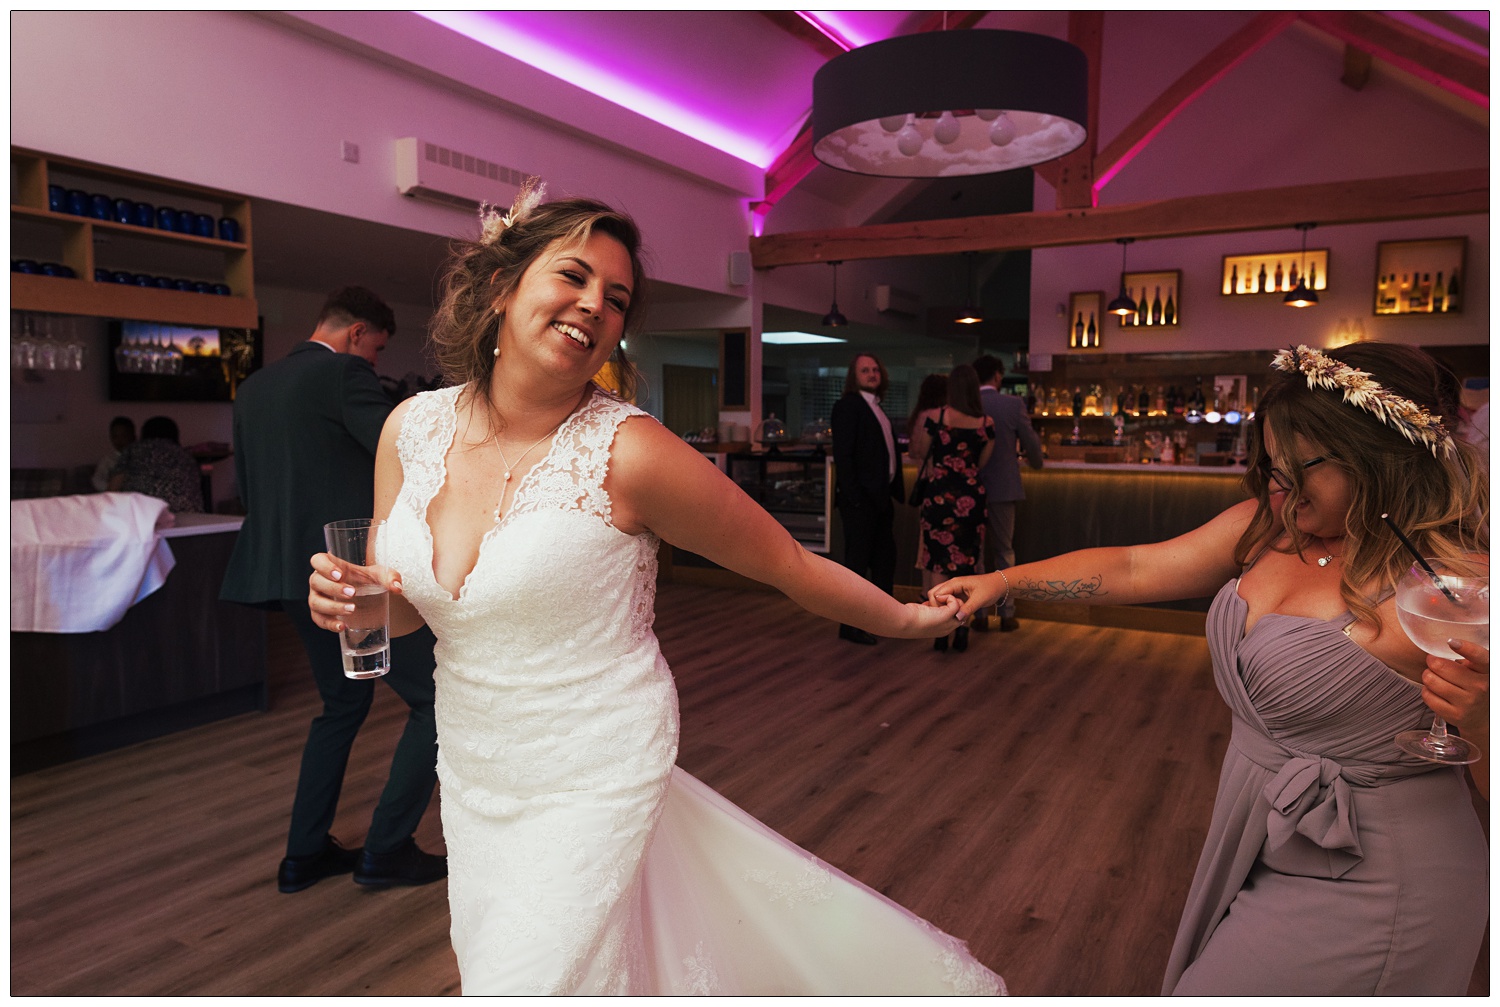 A bride dancing with her sister at the evening reception.